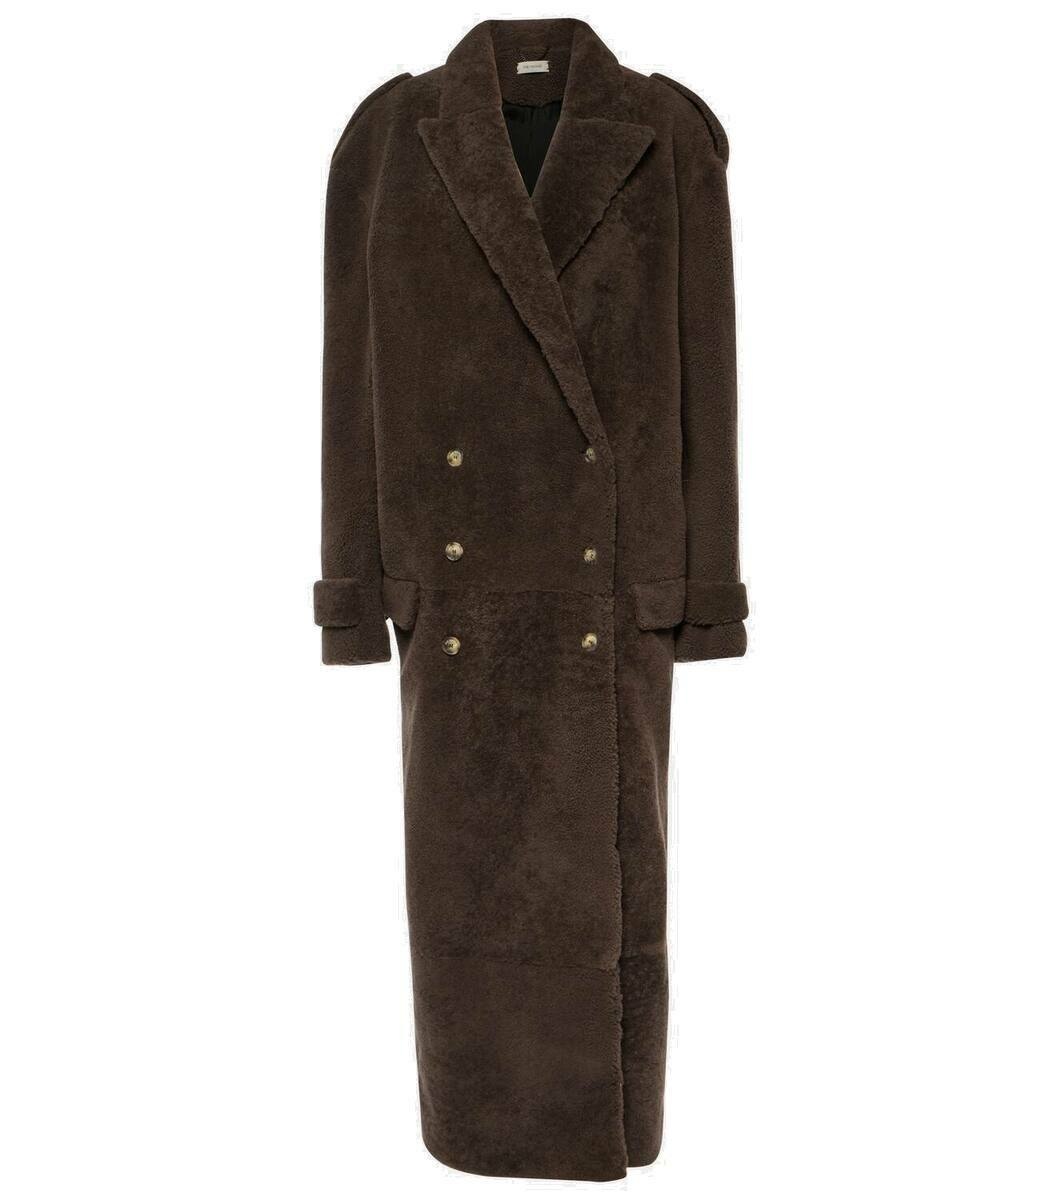 Photo: The Mannei Rutul oversized faux fur-trimmed coat